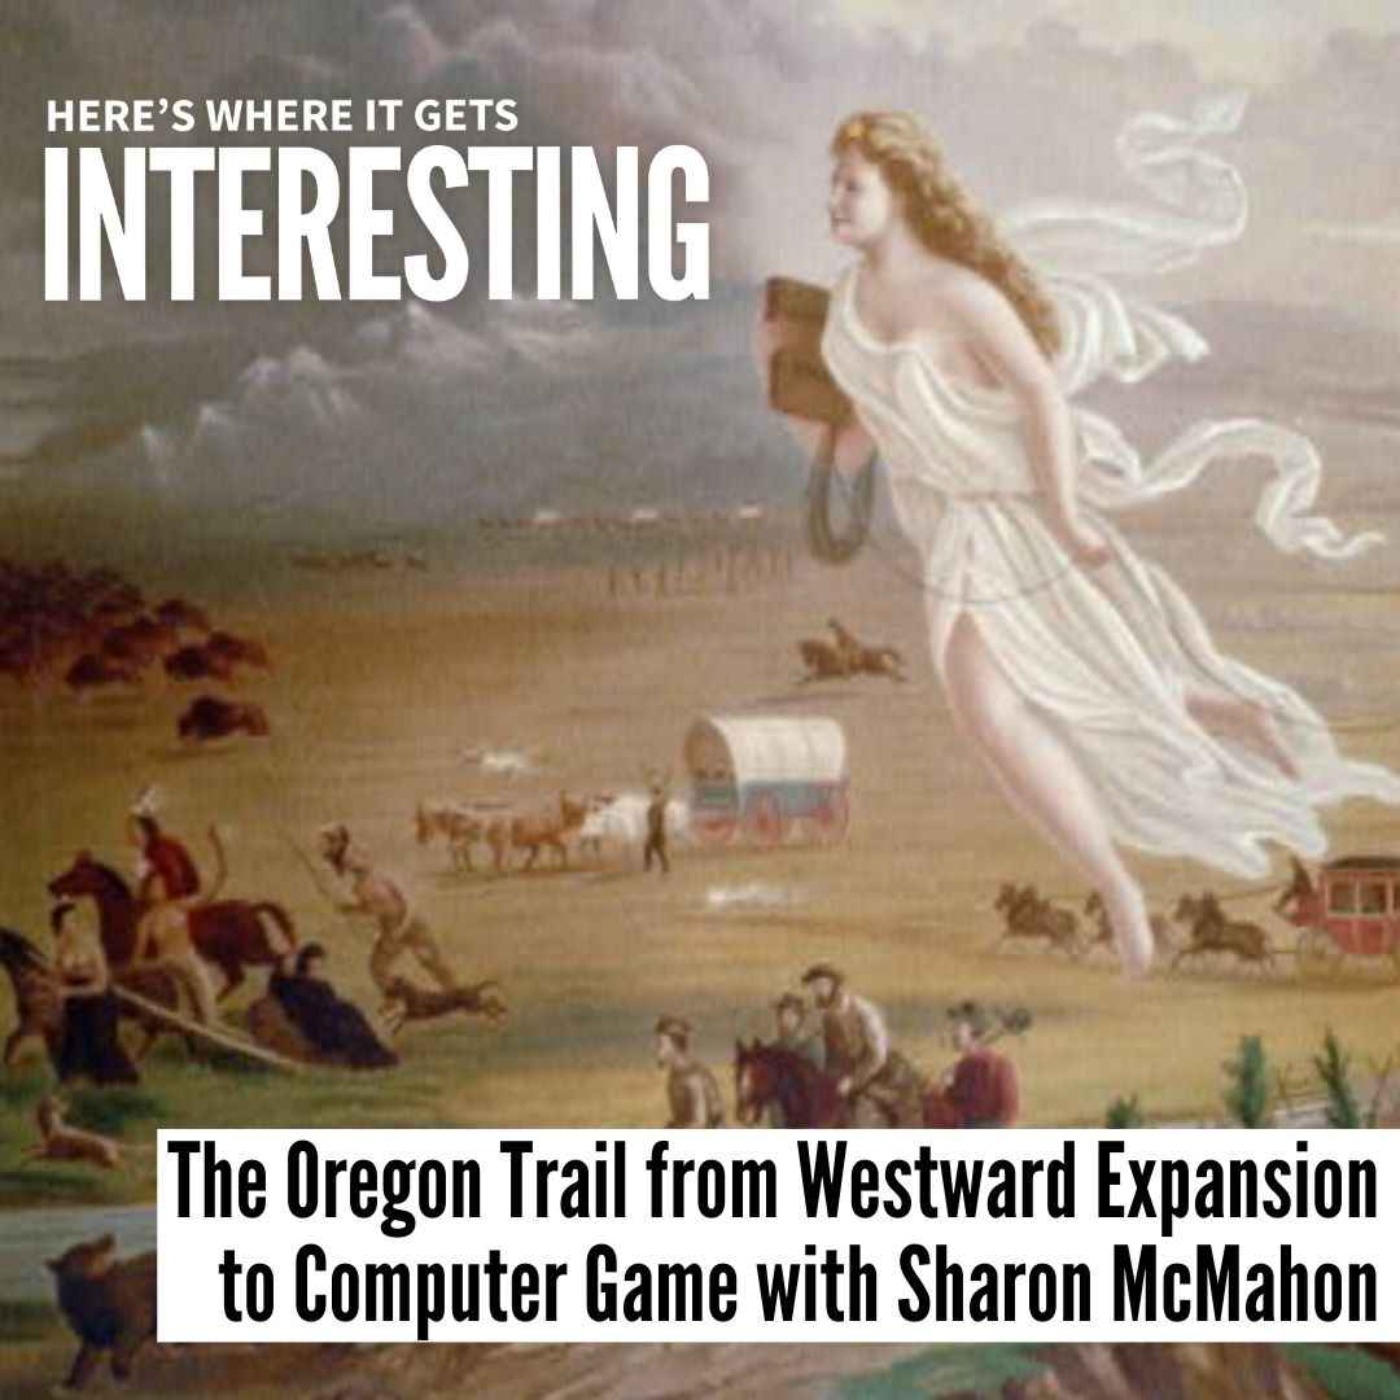 The Oregon Trail from Westward Expansion to Computer Game with Sharon McMahon